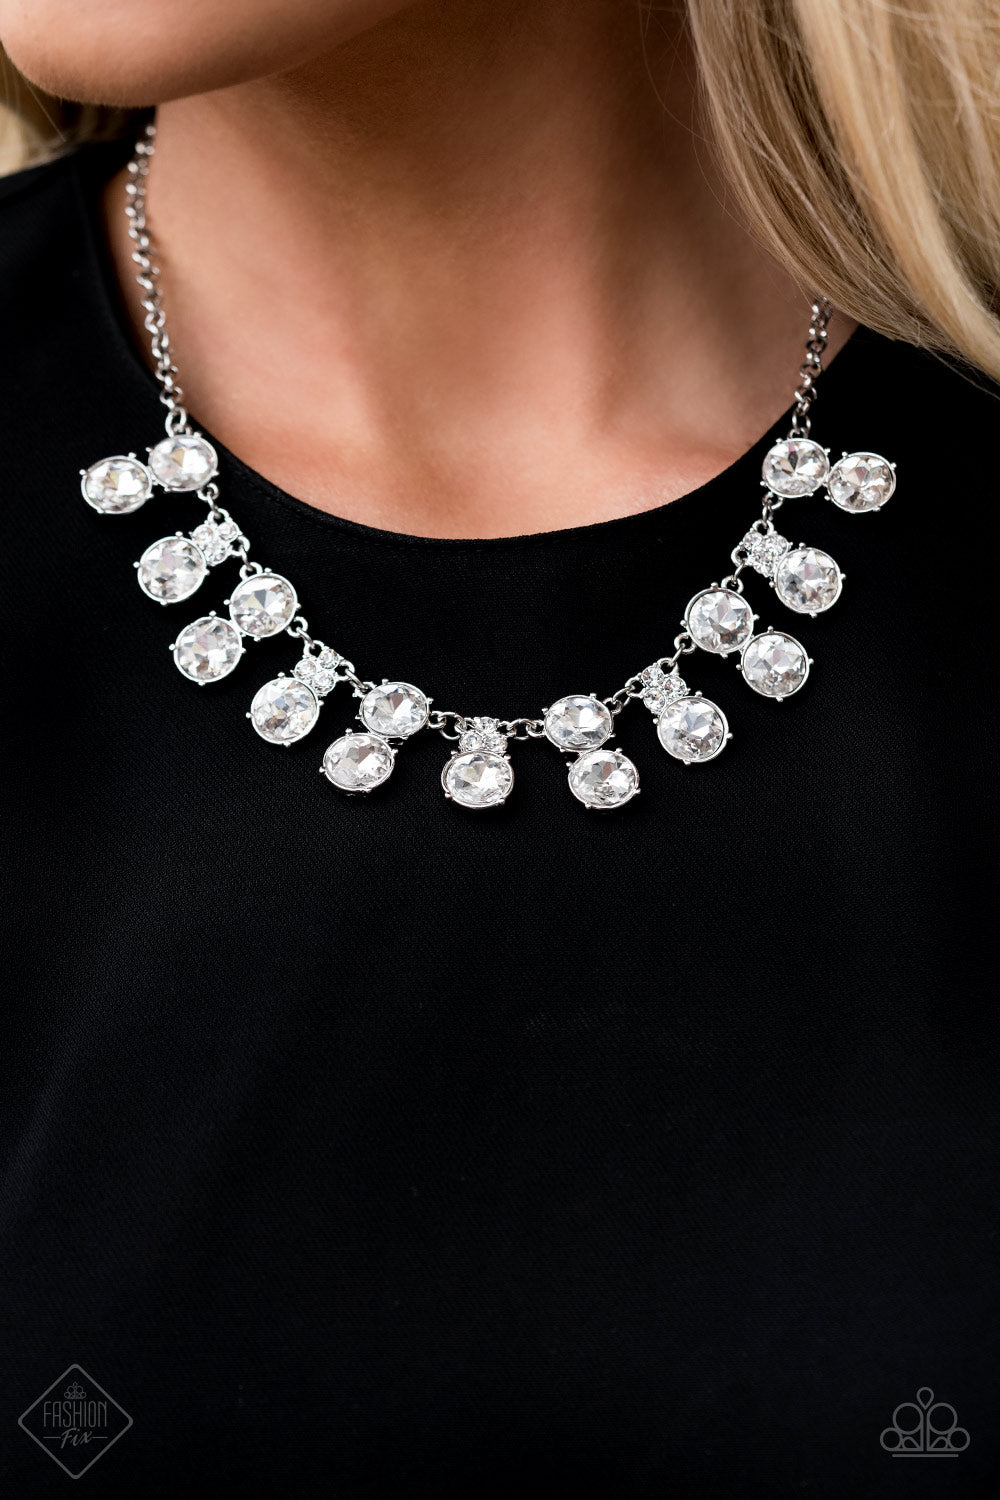 Paparazzi Accessories - Top Dollar Twinkle Fashion Fix Necklace